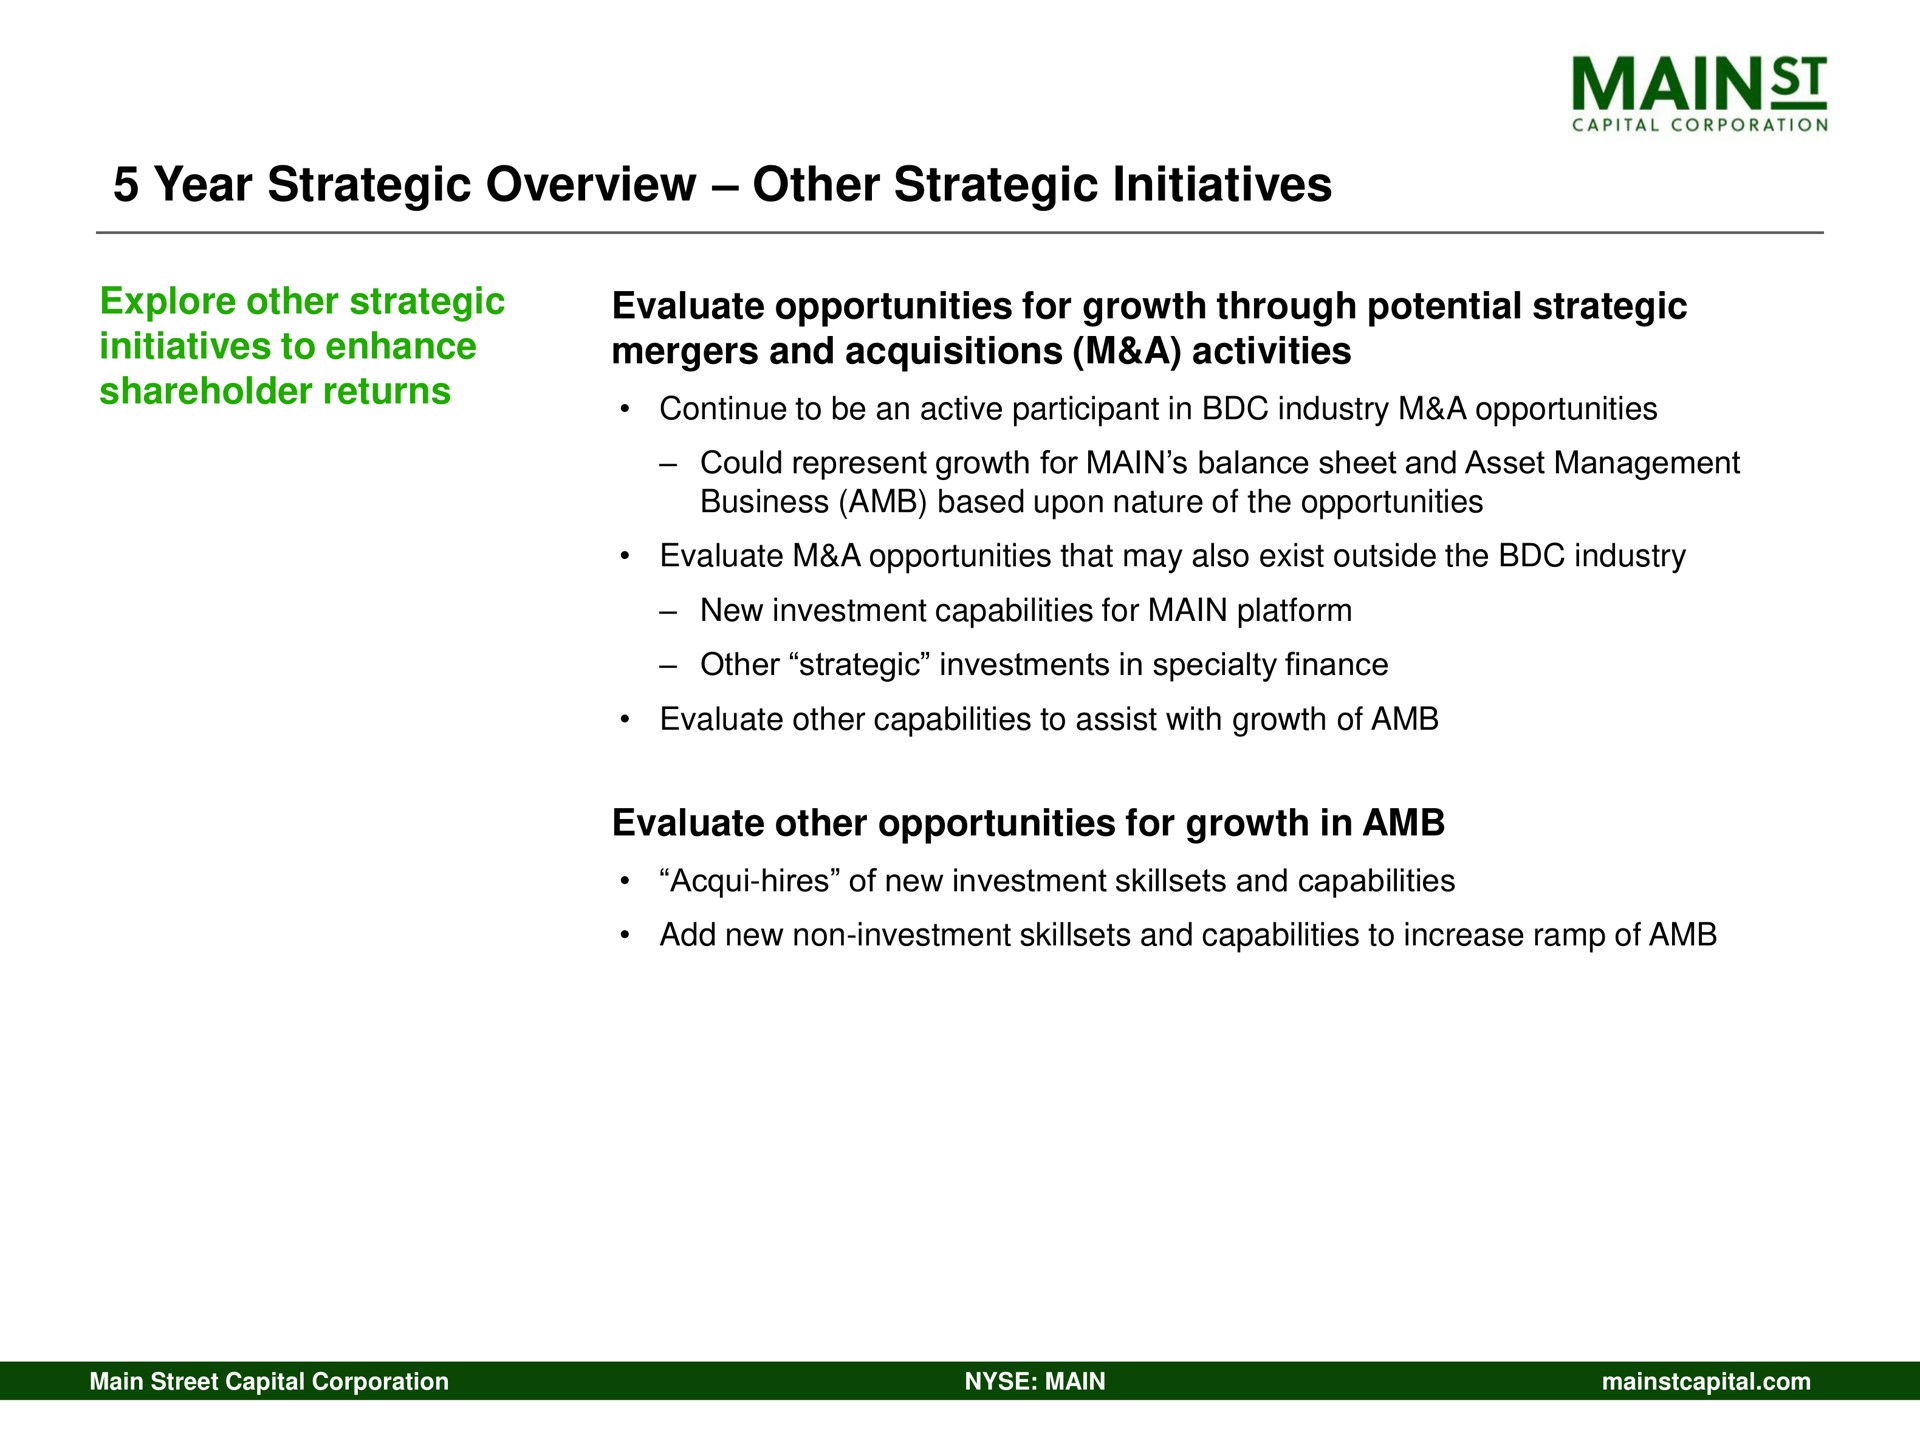 year strategic overview other strategic initiatives explore to enhance evaluate opportunities for growth through potential mergers and acquisitions a activities | Main Street Capital